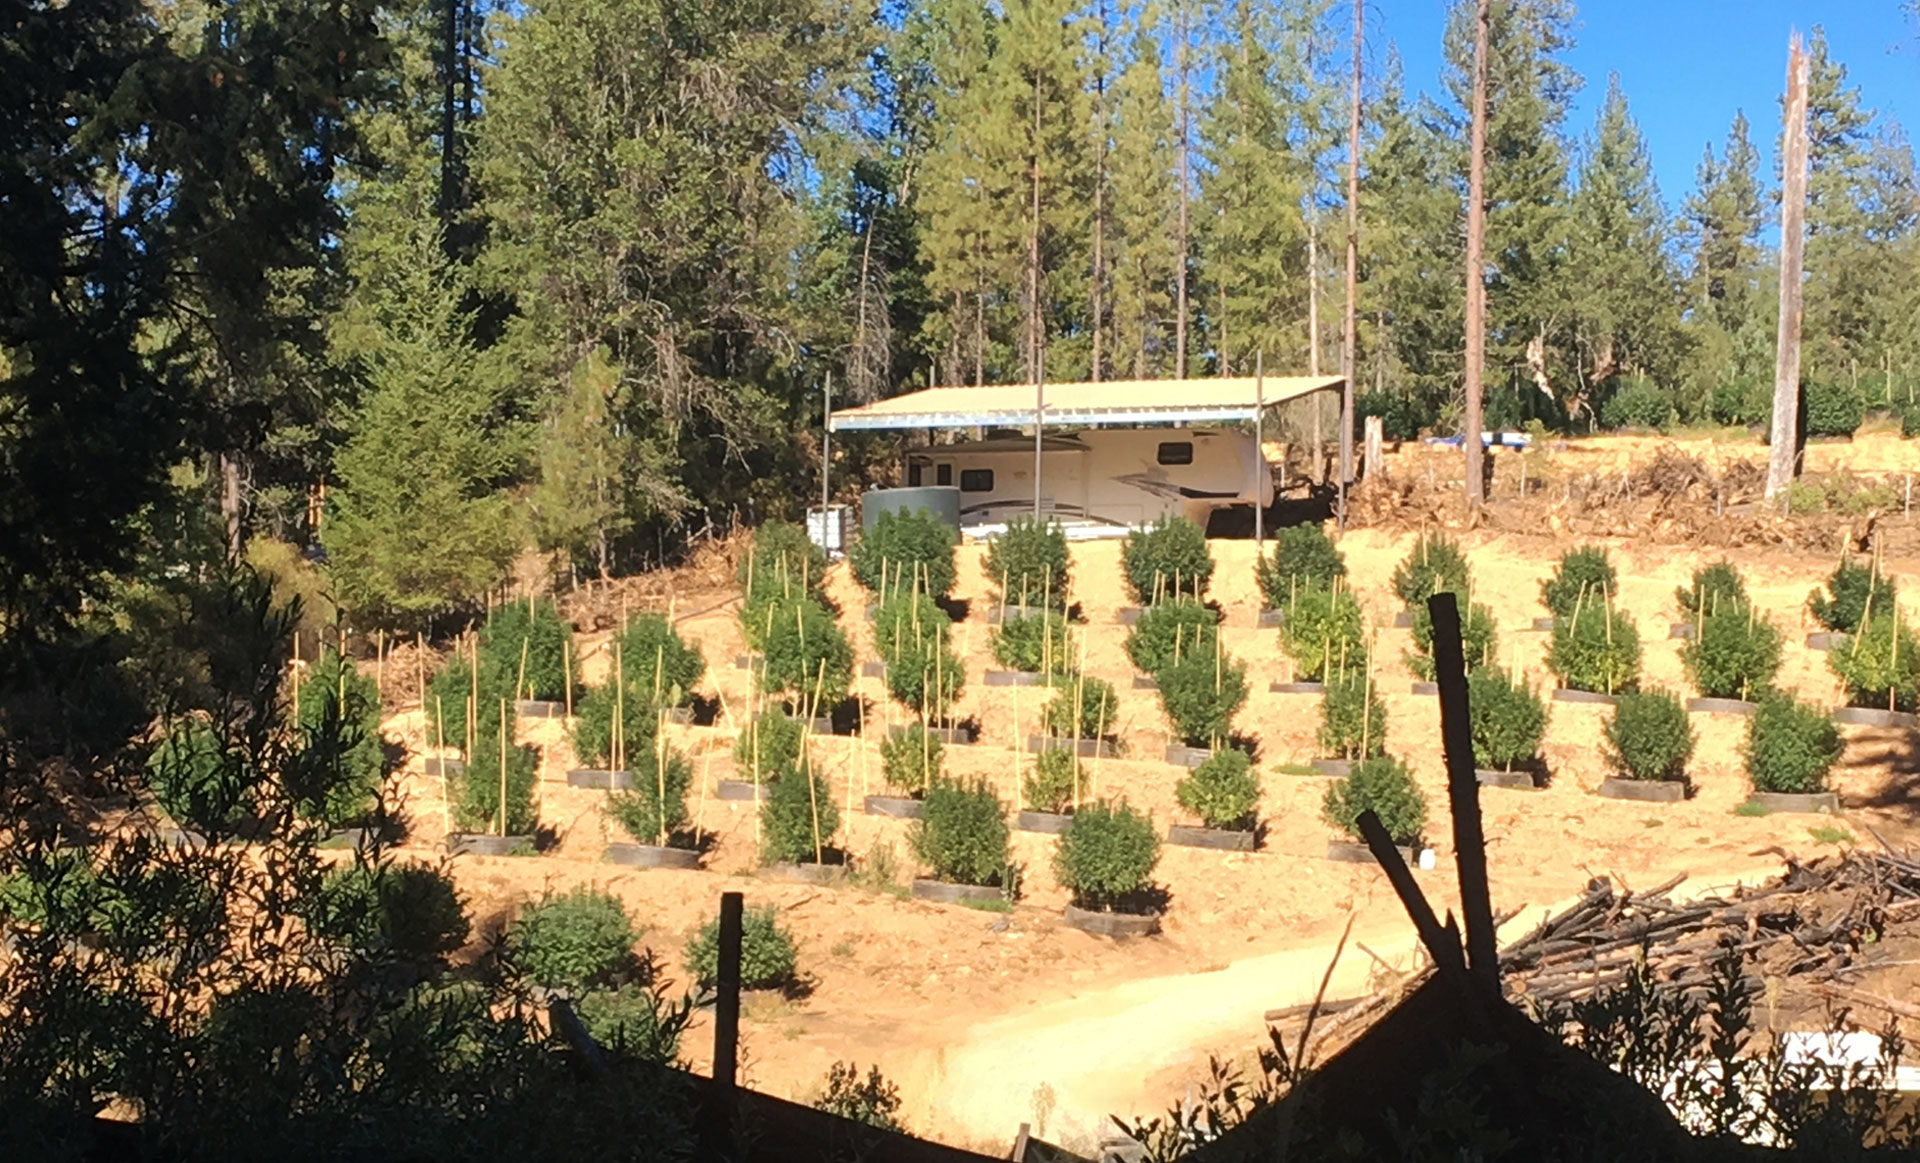 Hundreds of medical marijuana growers have set up operations in the private lots of Trinity Pines. 